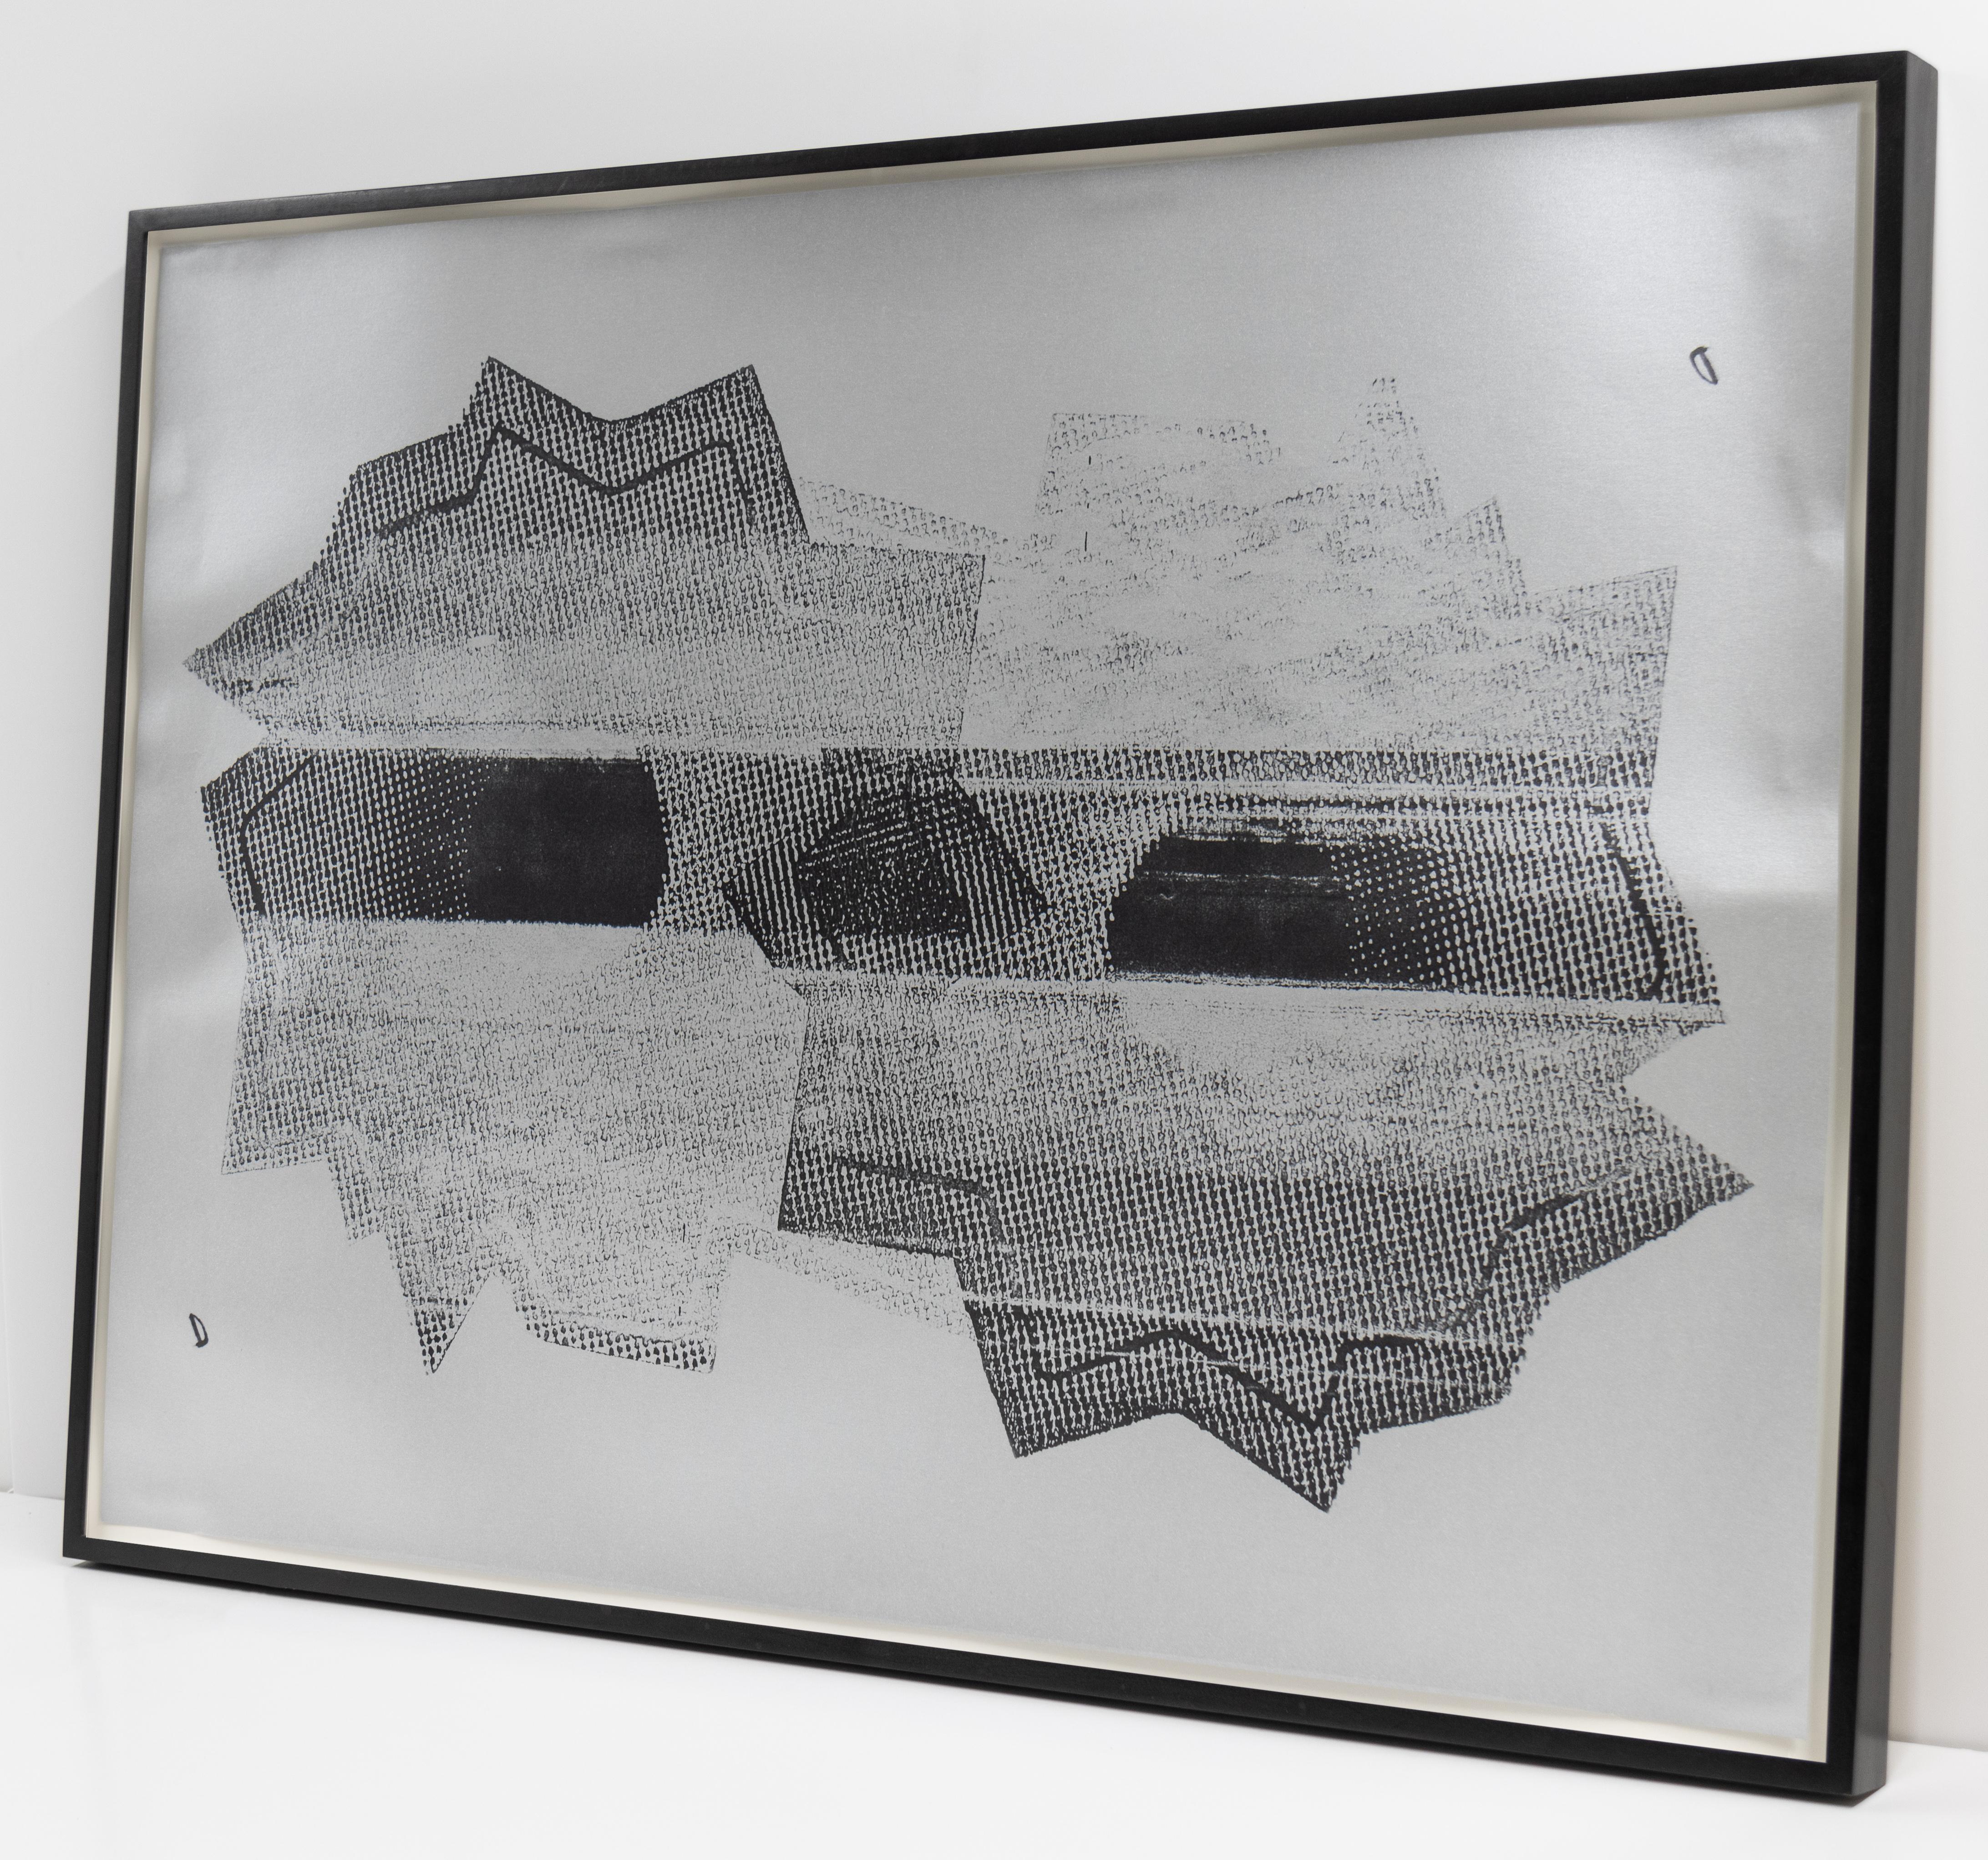 This is a screenprint on silver metallic paper of two abstracted bullet holes.

This artwork by Nate Lowman is offered by CLAMP in New York City.